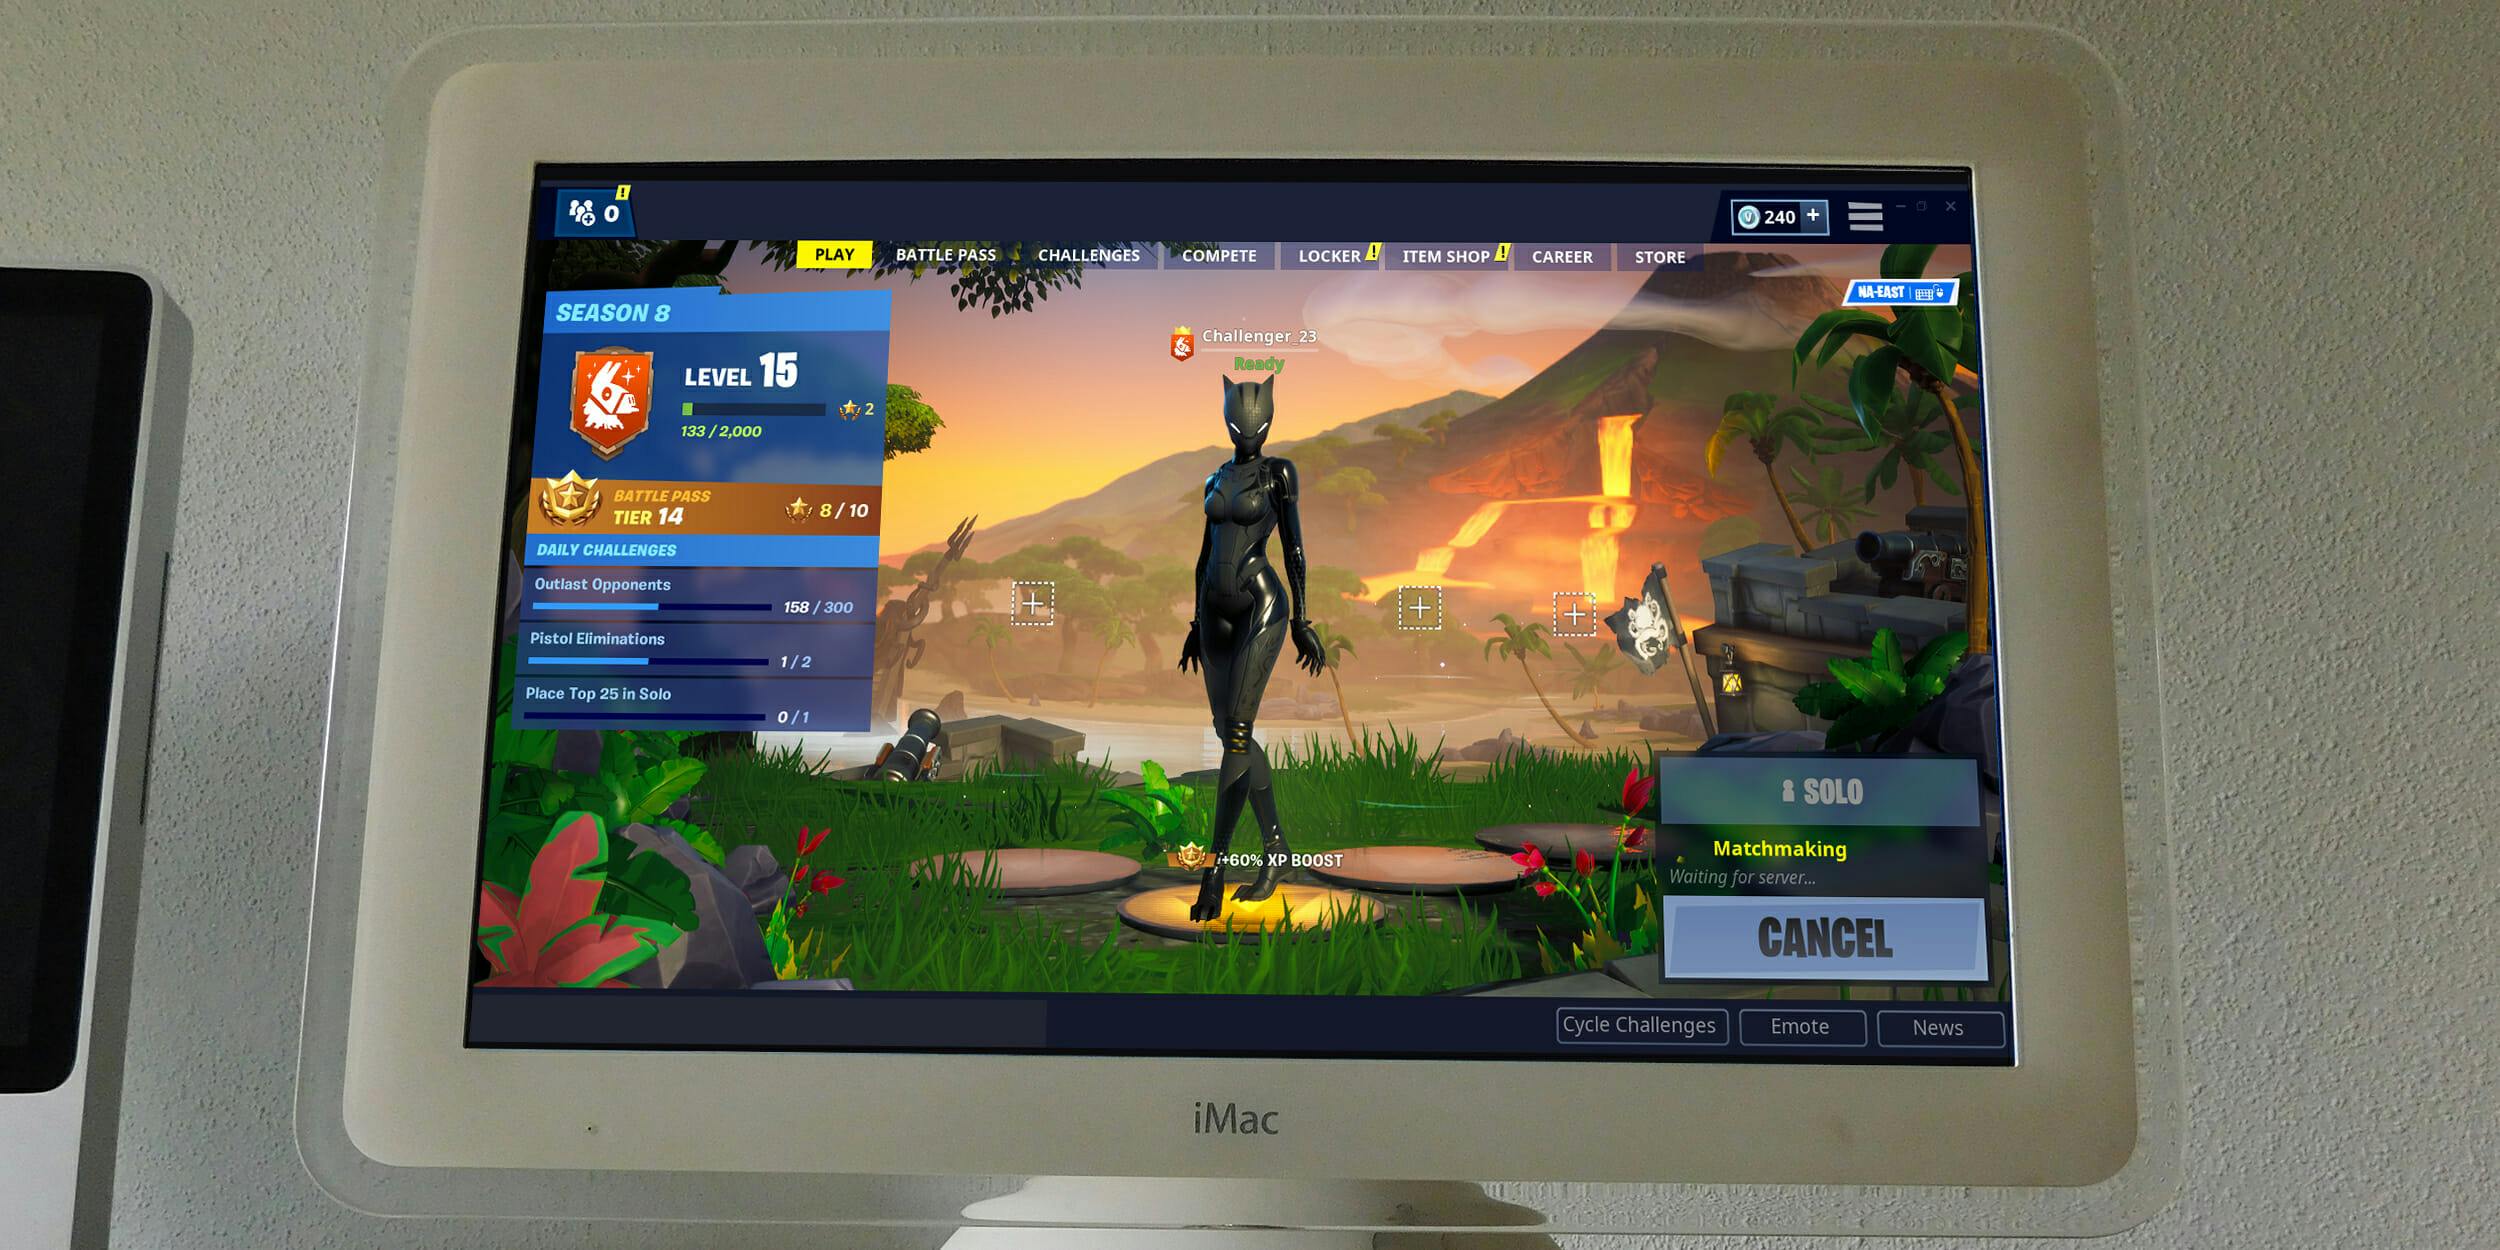 How to Download & Play Fortnite on Mac